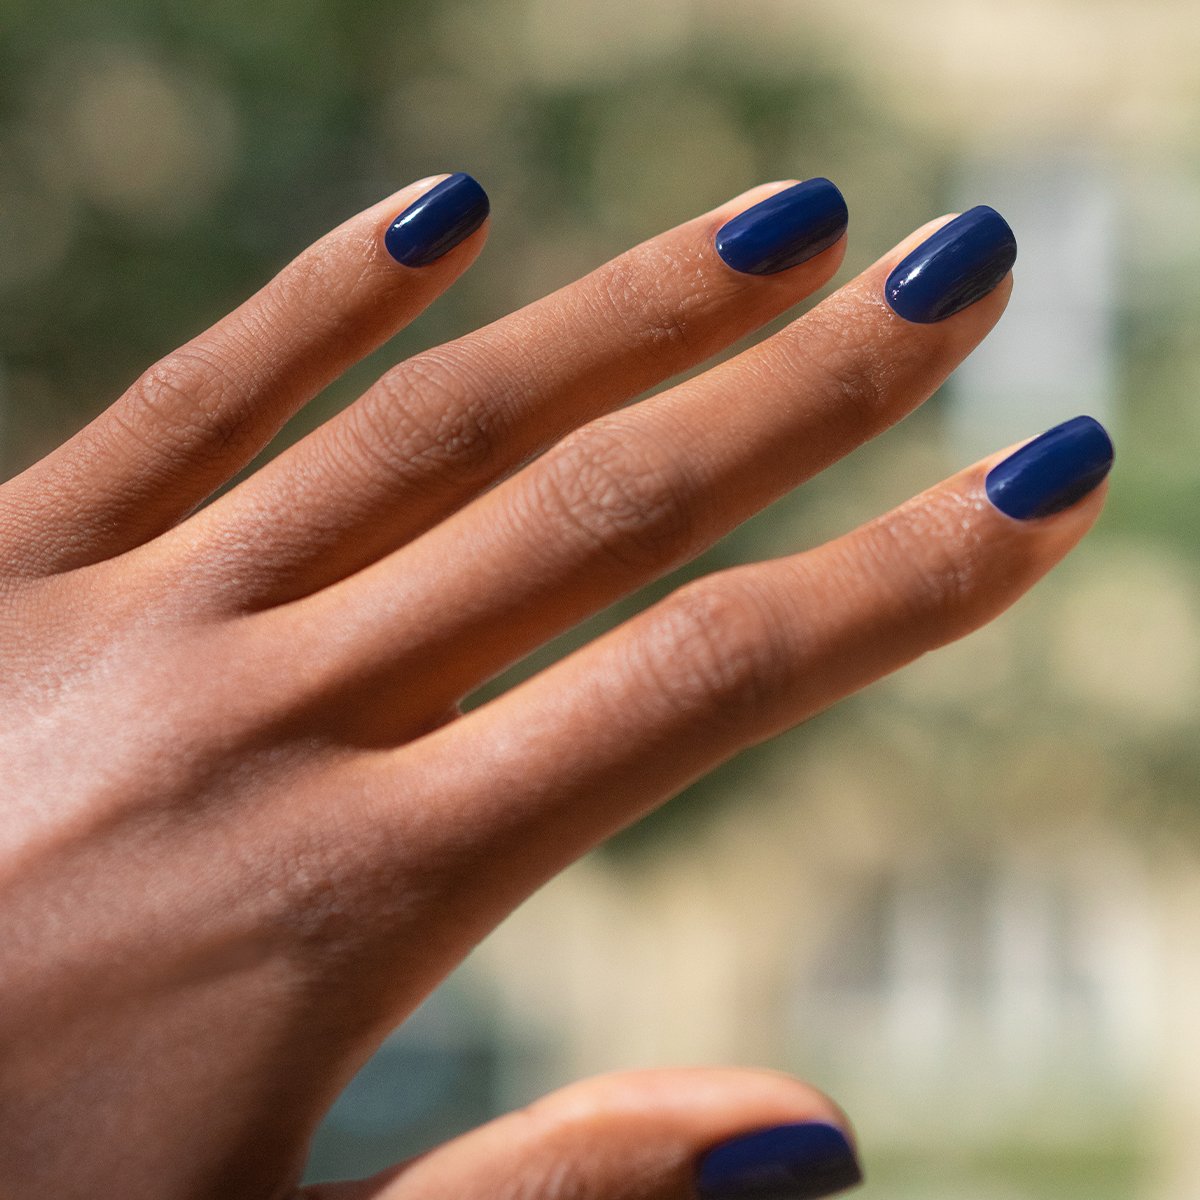 Latixmat High Pigmented & Long Stay Unique Dull Matte Sky Blue Nail Polish  SKY BLUE - Price in India, Buy Latixmat High Pigmented & Long Stay Unique  Dull Matte Sky Blue Nail